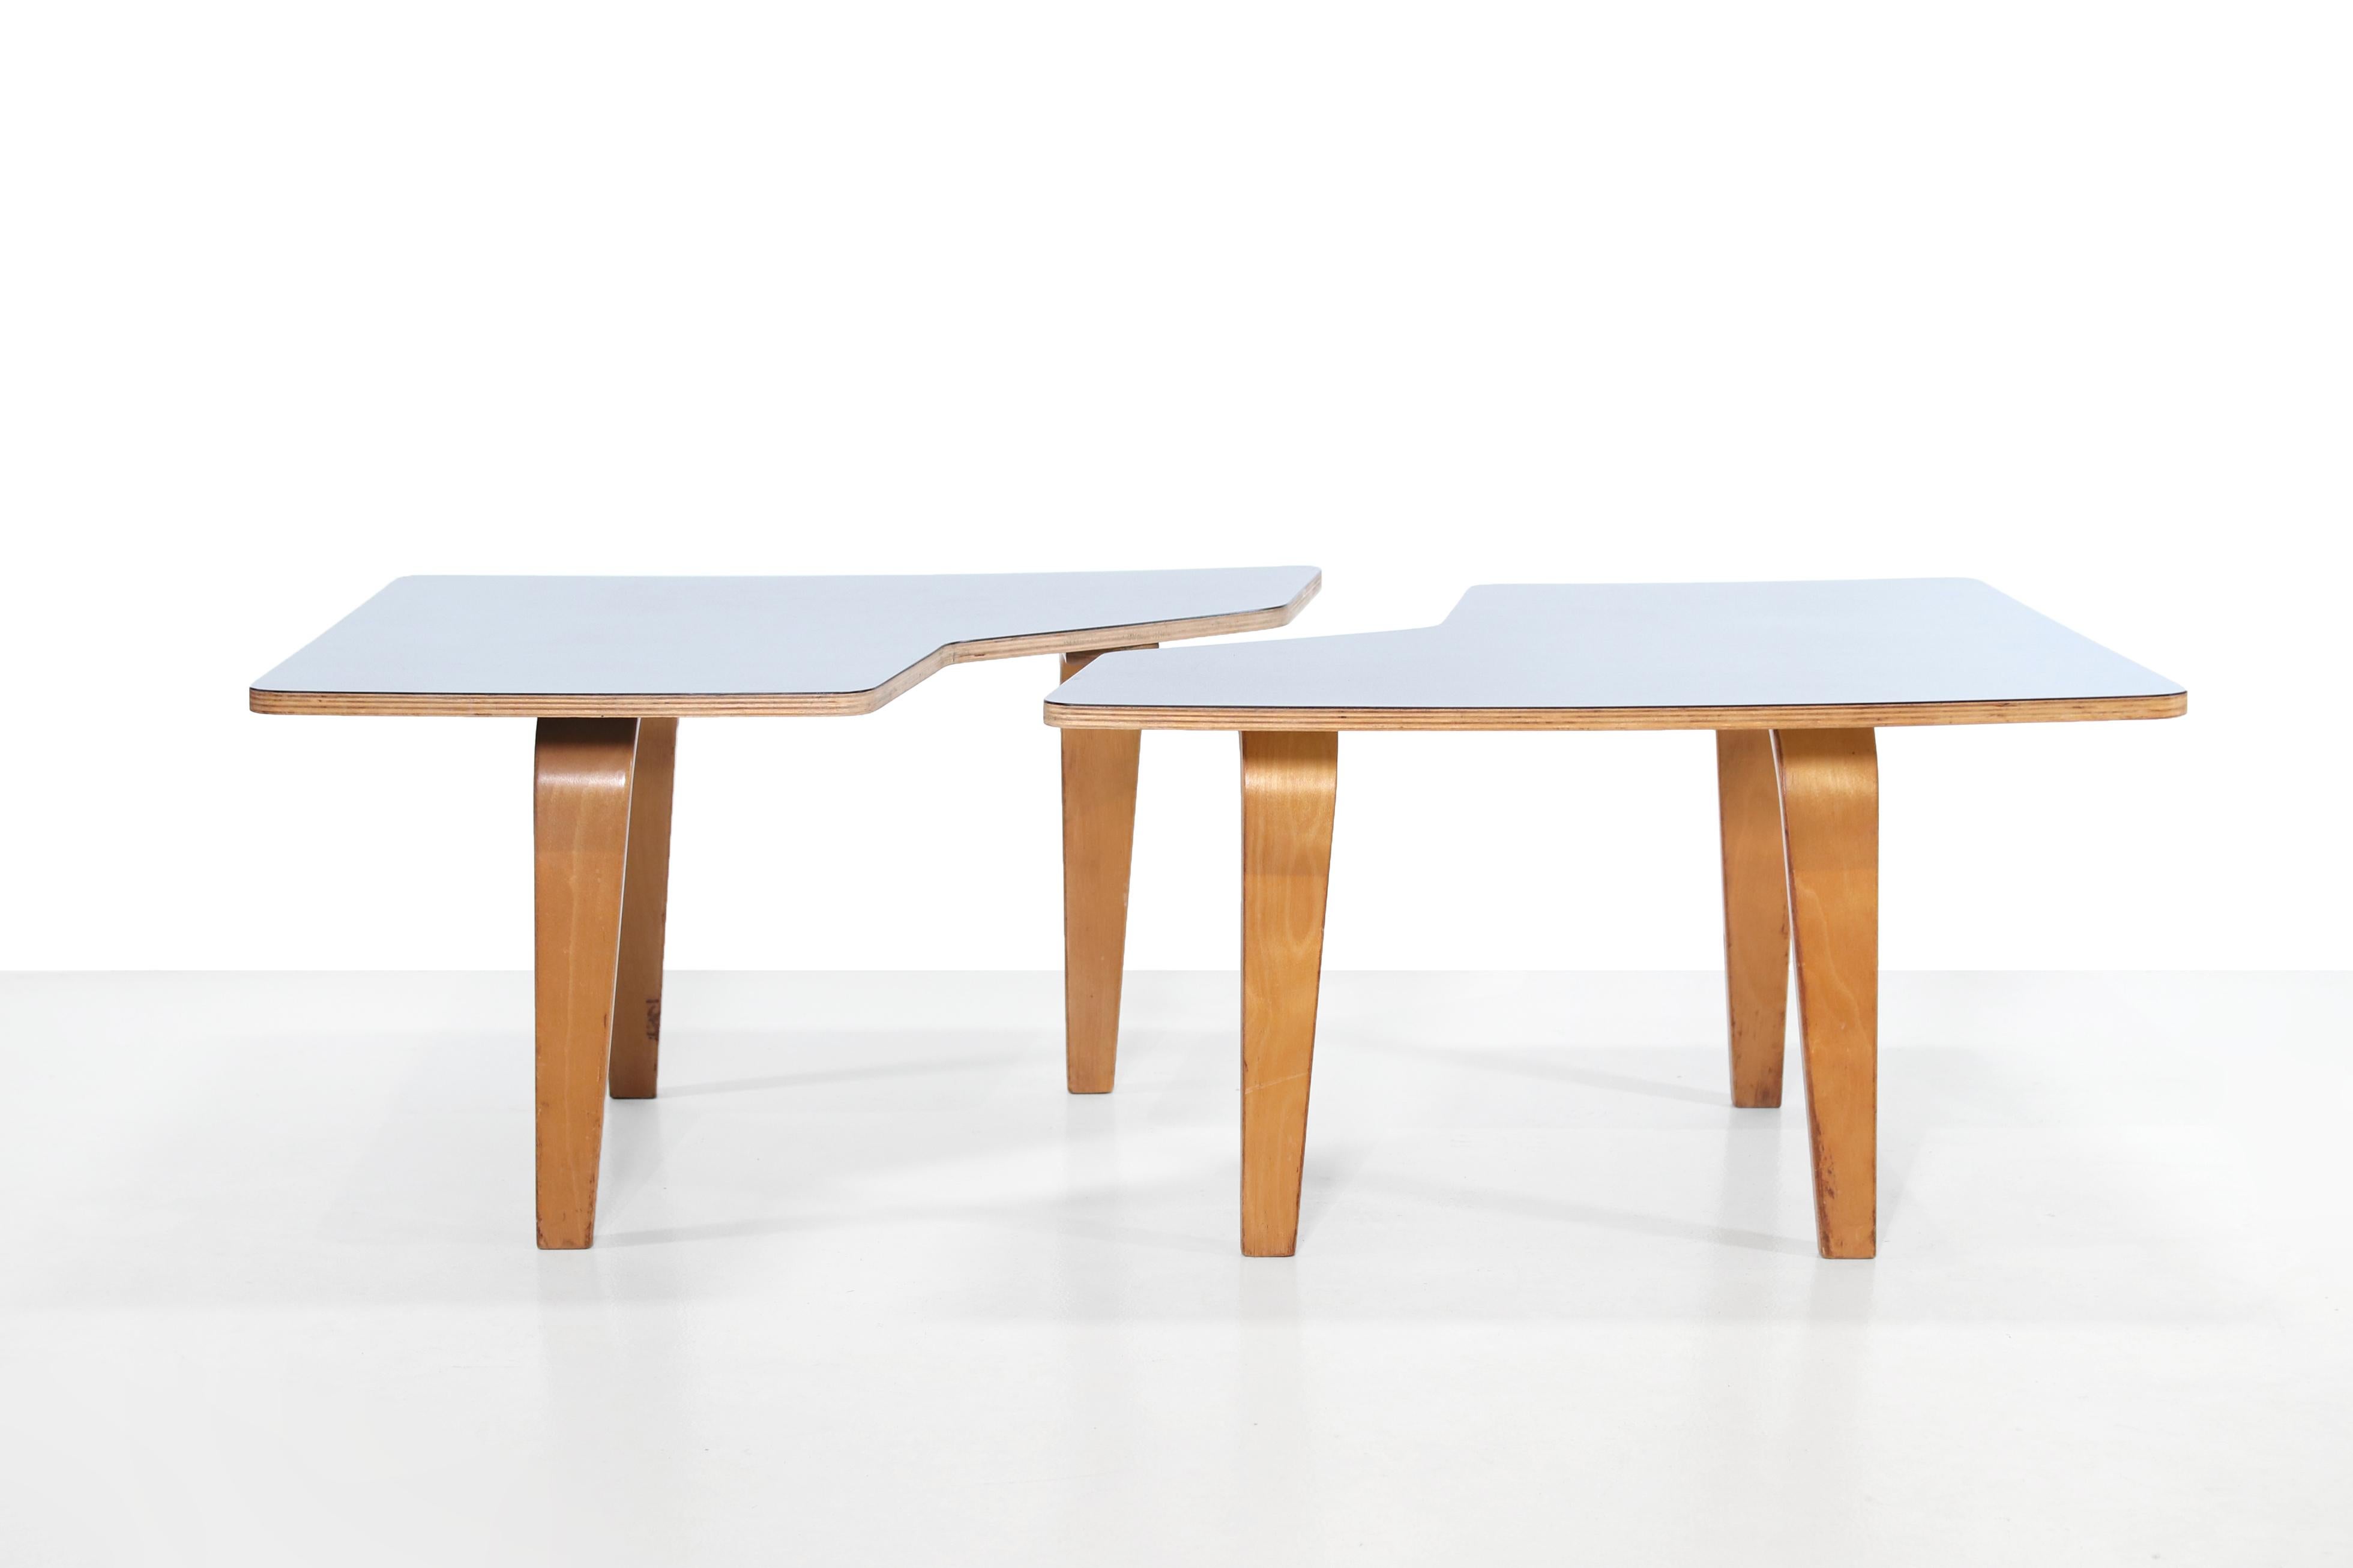 Beautiful set of two puzzle-shaped tables that together form an elongated coffee table. These tables were designed by Cees Braakman and produced by Pastoe in the 1950s in Utrecht, the Netherlands. They are part of the Combex series which was one of